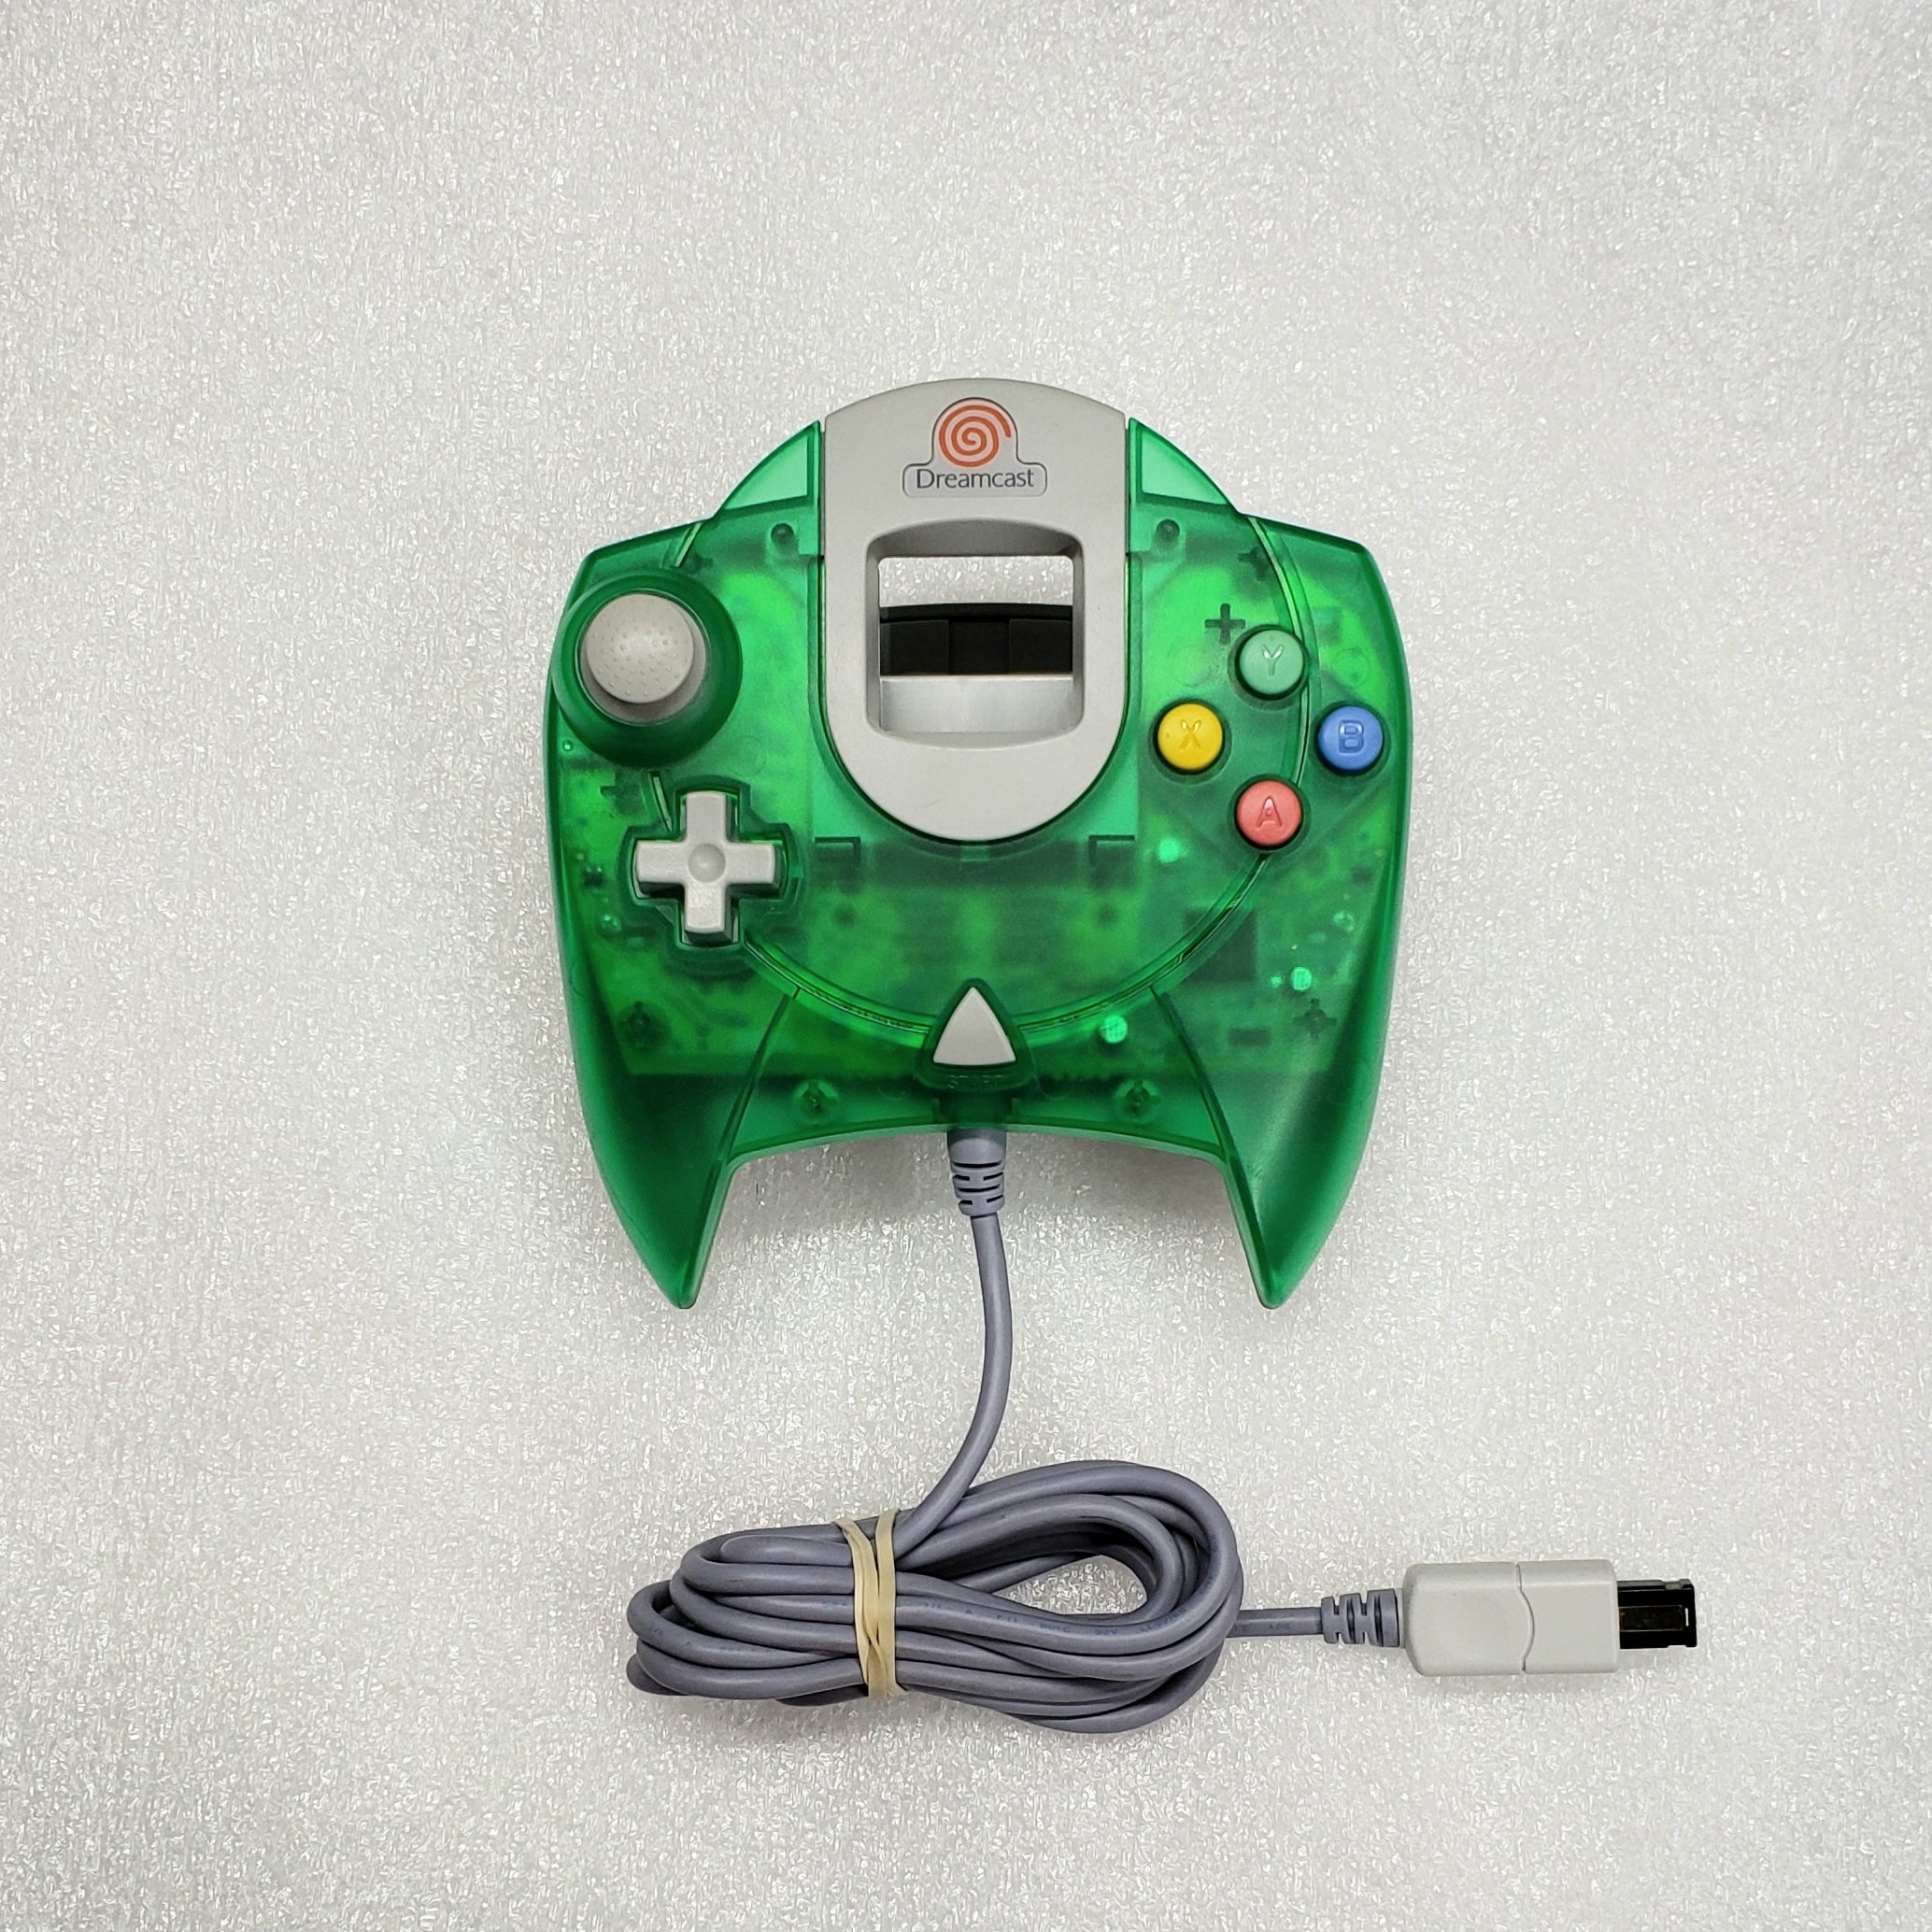 Sega Dreamcast Controller - Transparent Green - YourGamingShop.com - Buy, Sell, Trade Video Games Online. 120 Day Warranty. Satisfaction Guaranteed.